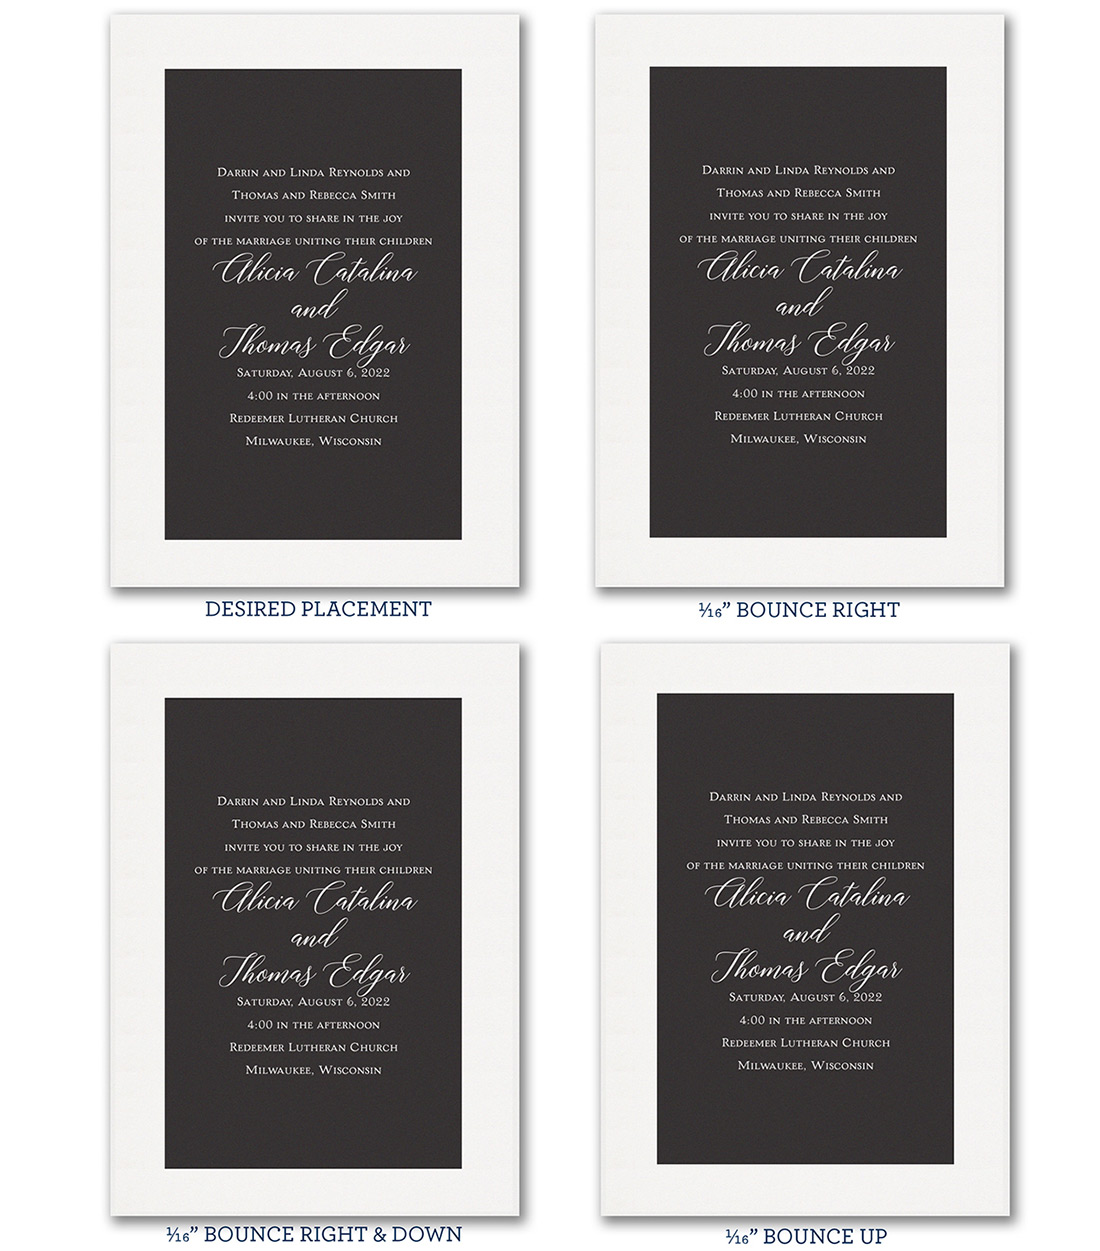 Four images of the same invitation showing a 1 3/4" white border and a 1/16" shift in placement due to tolerance or bounce. 